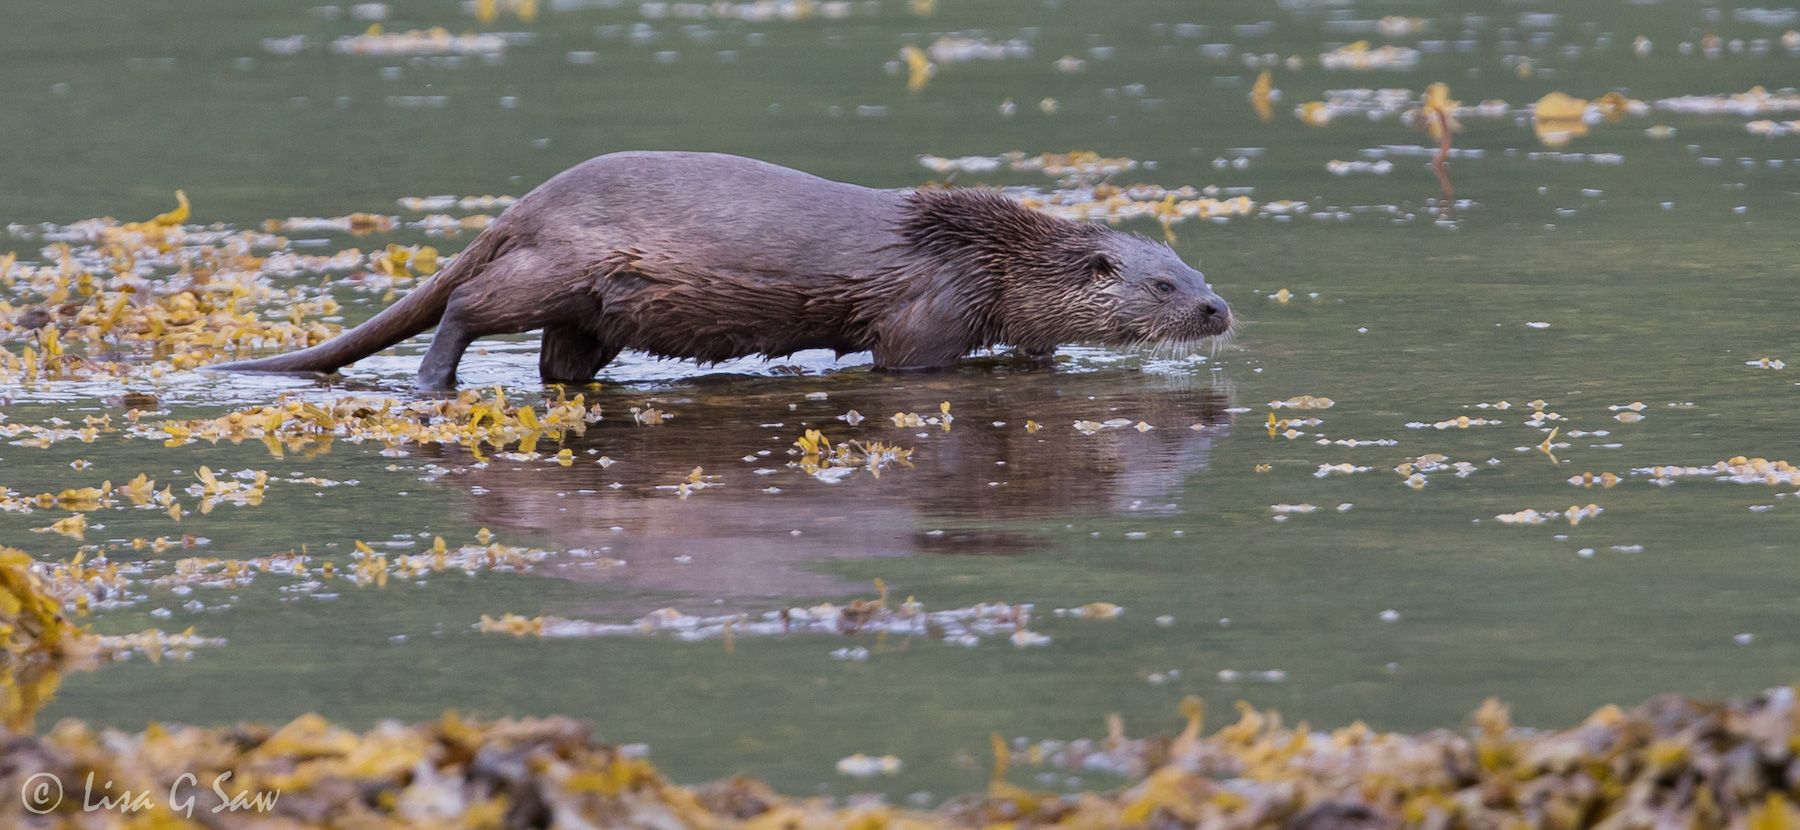 River Otter standing low in water